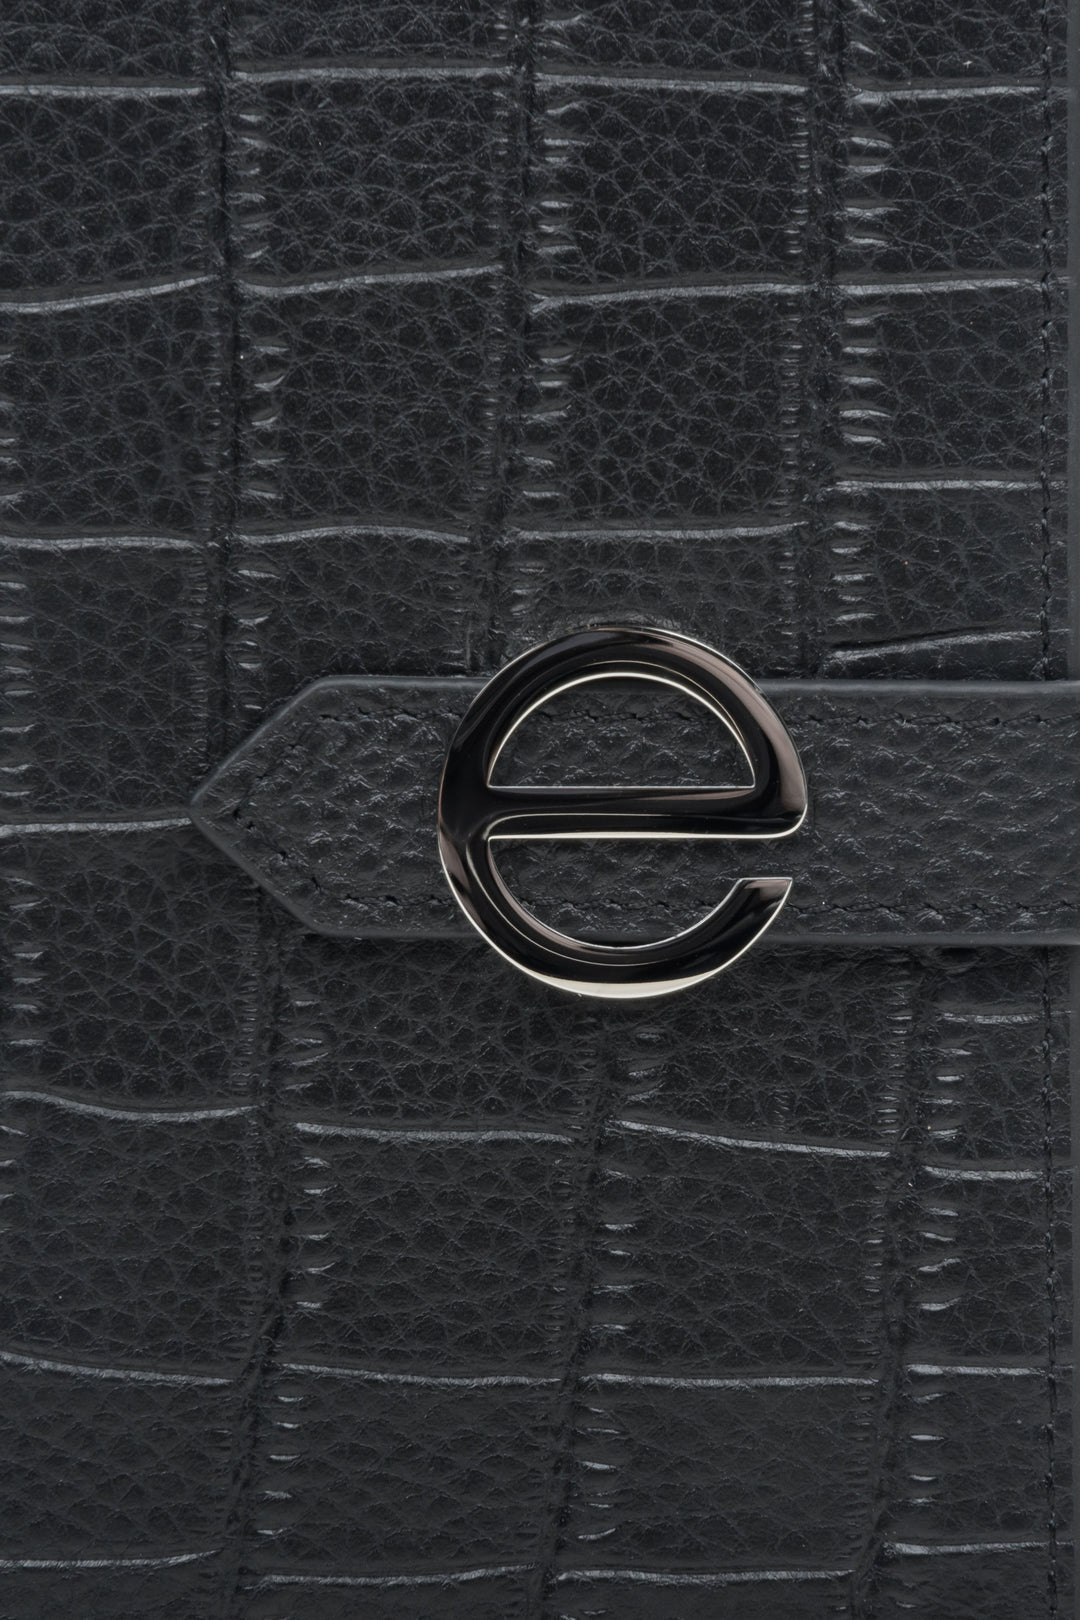 Women's large black leather wallet by Estro - close-up on details.